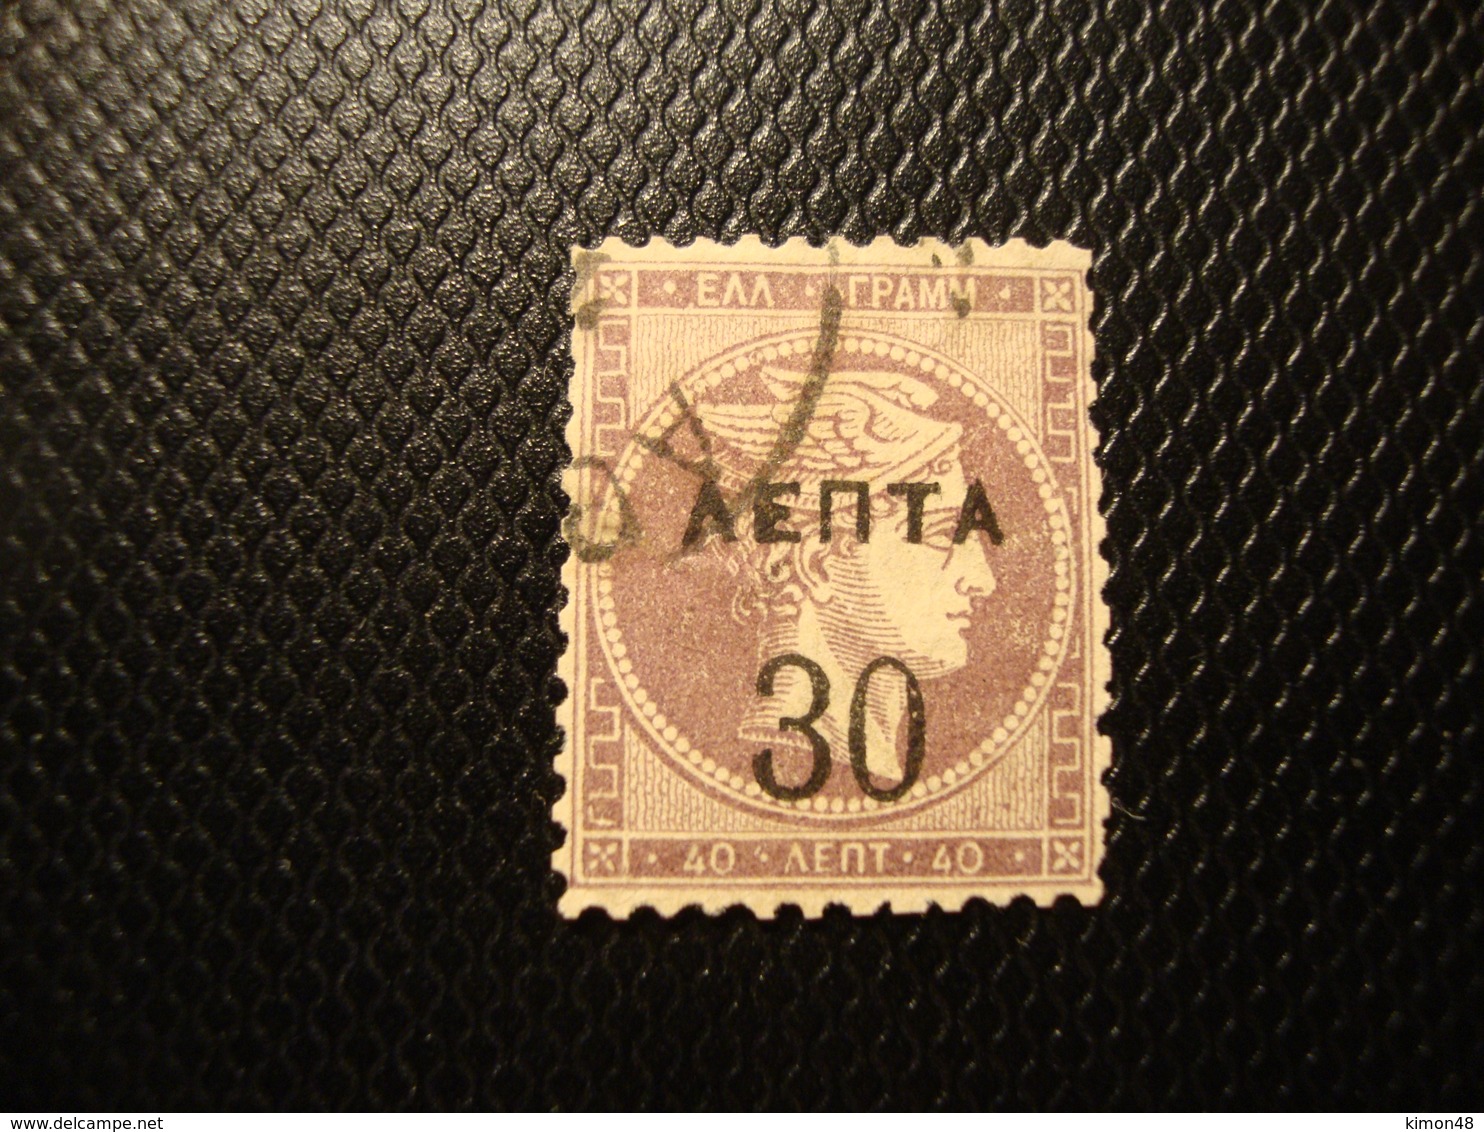 GREECE:1900.P.11 1/2.HELLAS.160c (SPACE 4 Mm) GENUINE USED STAMP.PLATE FLAW CFII (OPEN CROSS UP RIGHT).PRICE 110 EUROS. - Oblitérés